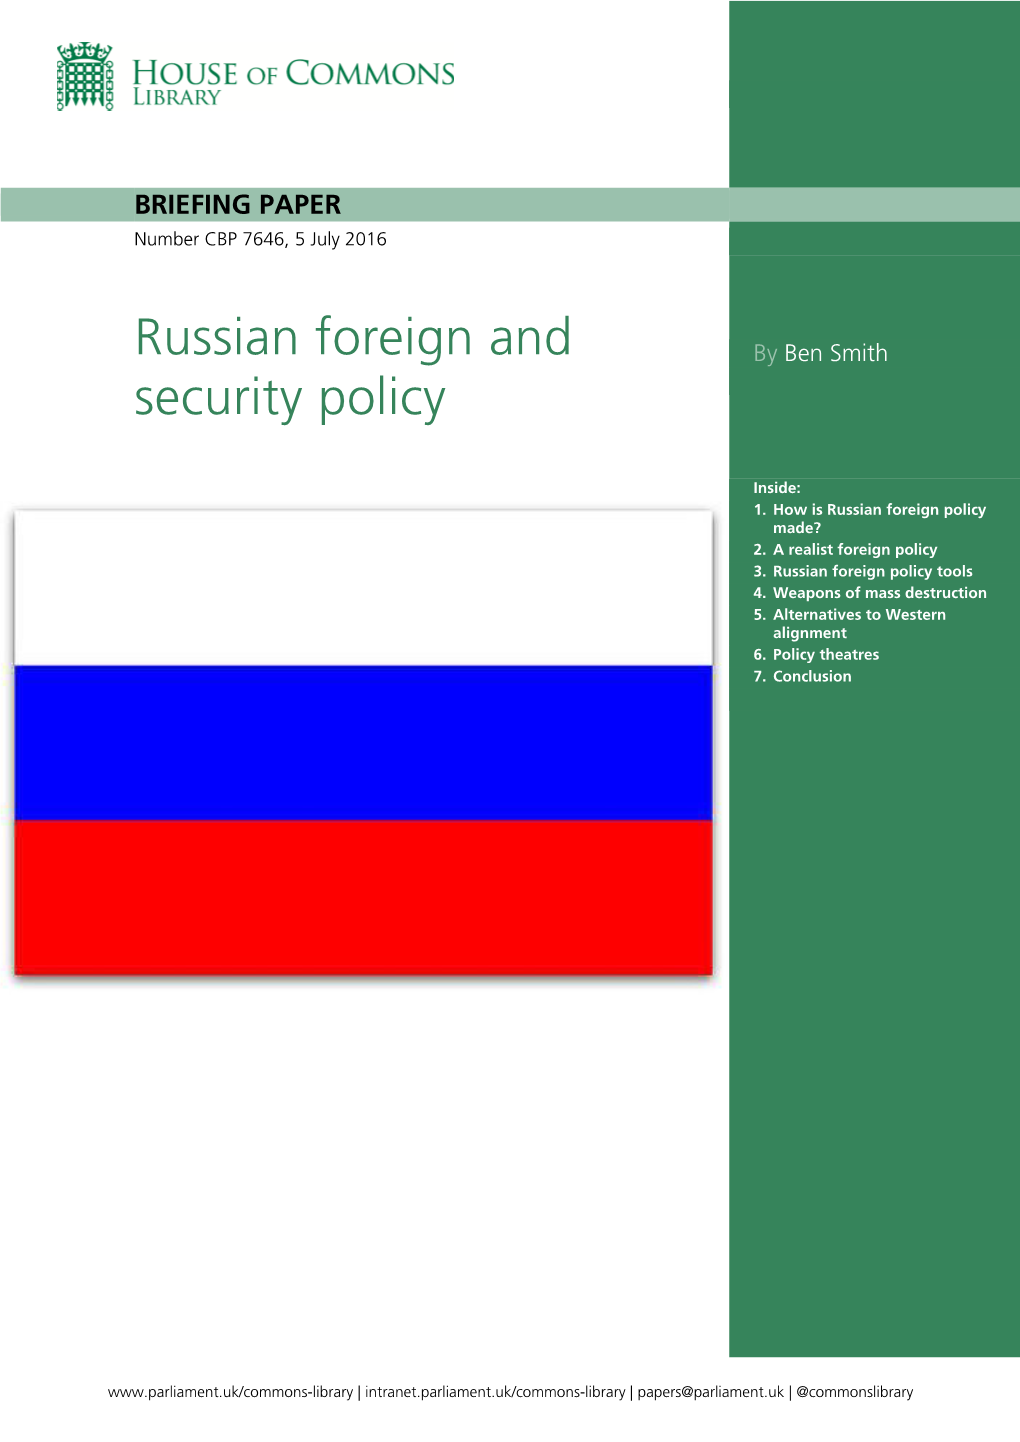 Russian Foreign and Security Policy